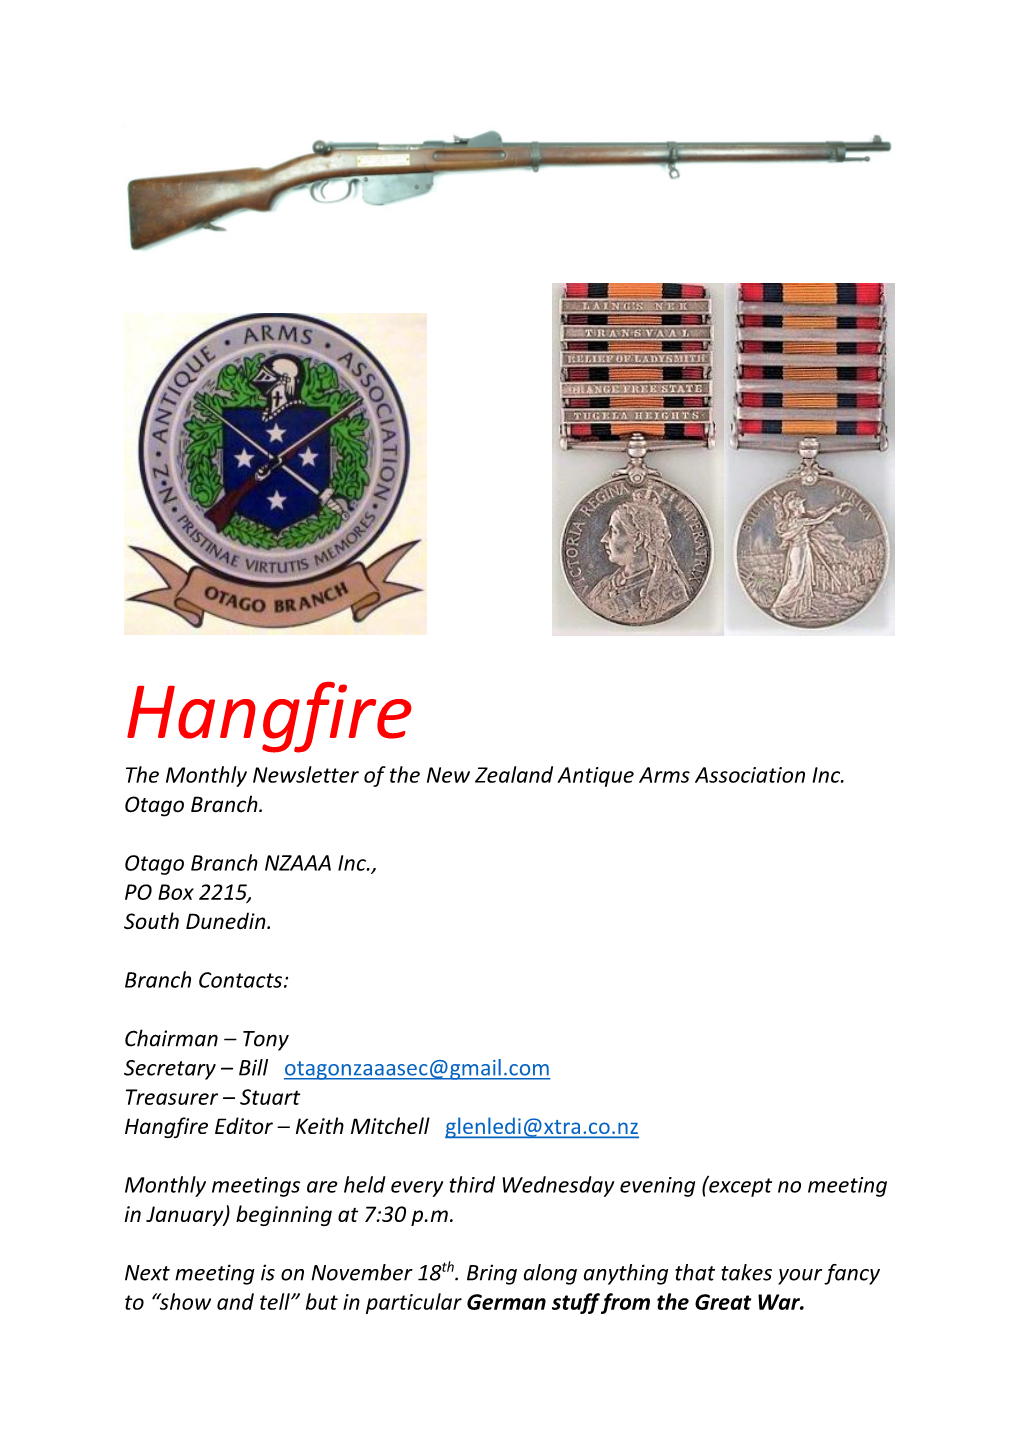 Hangfire the Monthly Newsletter of the New Zealand Antique Arms Association Inc